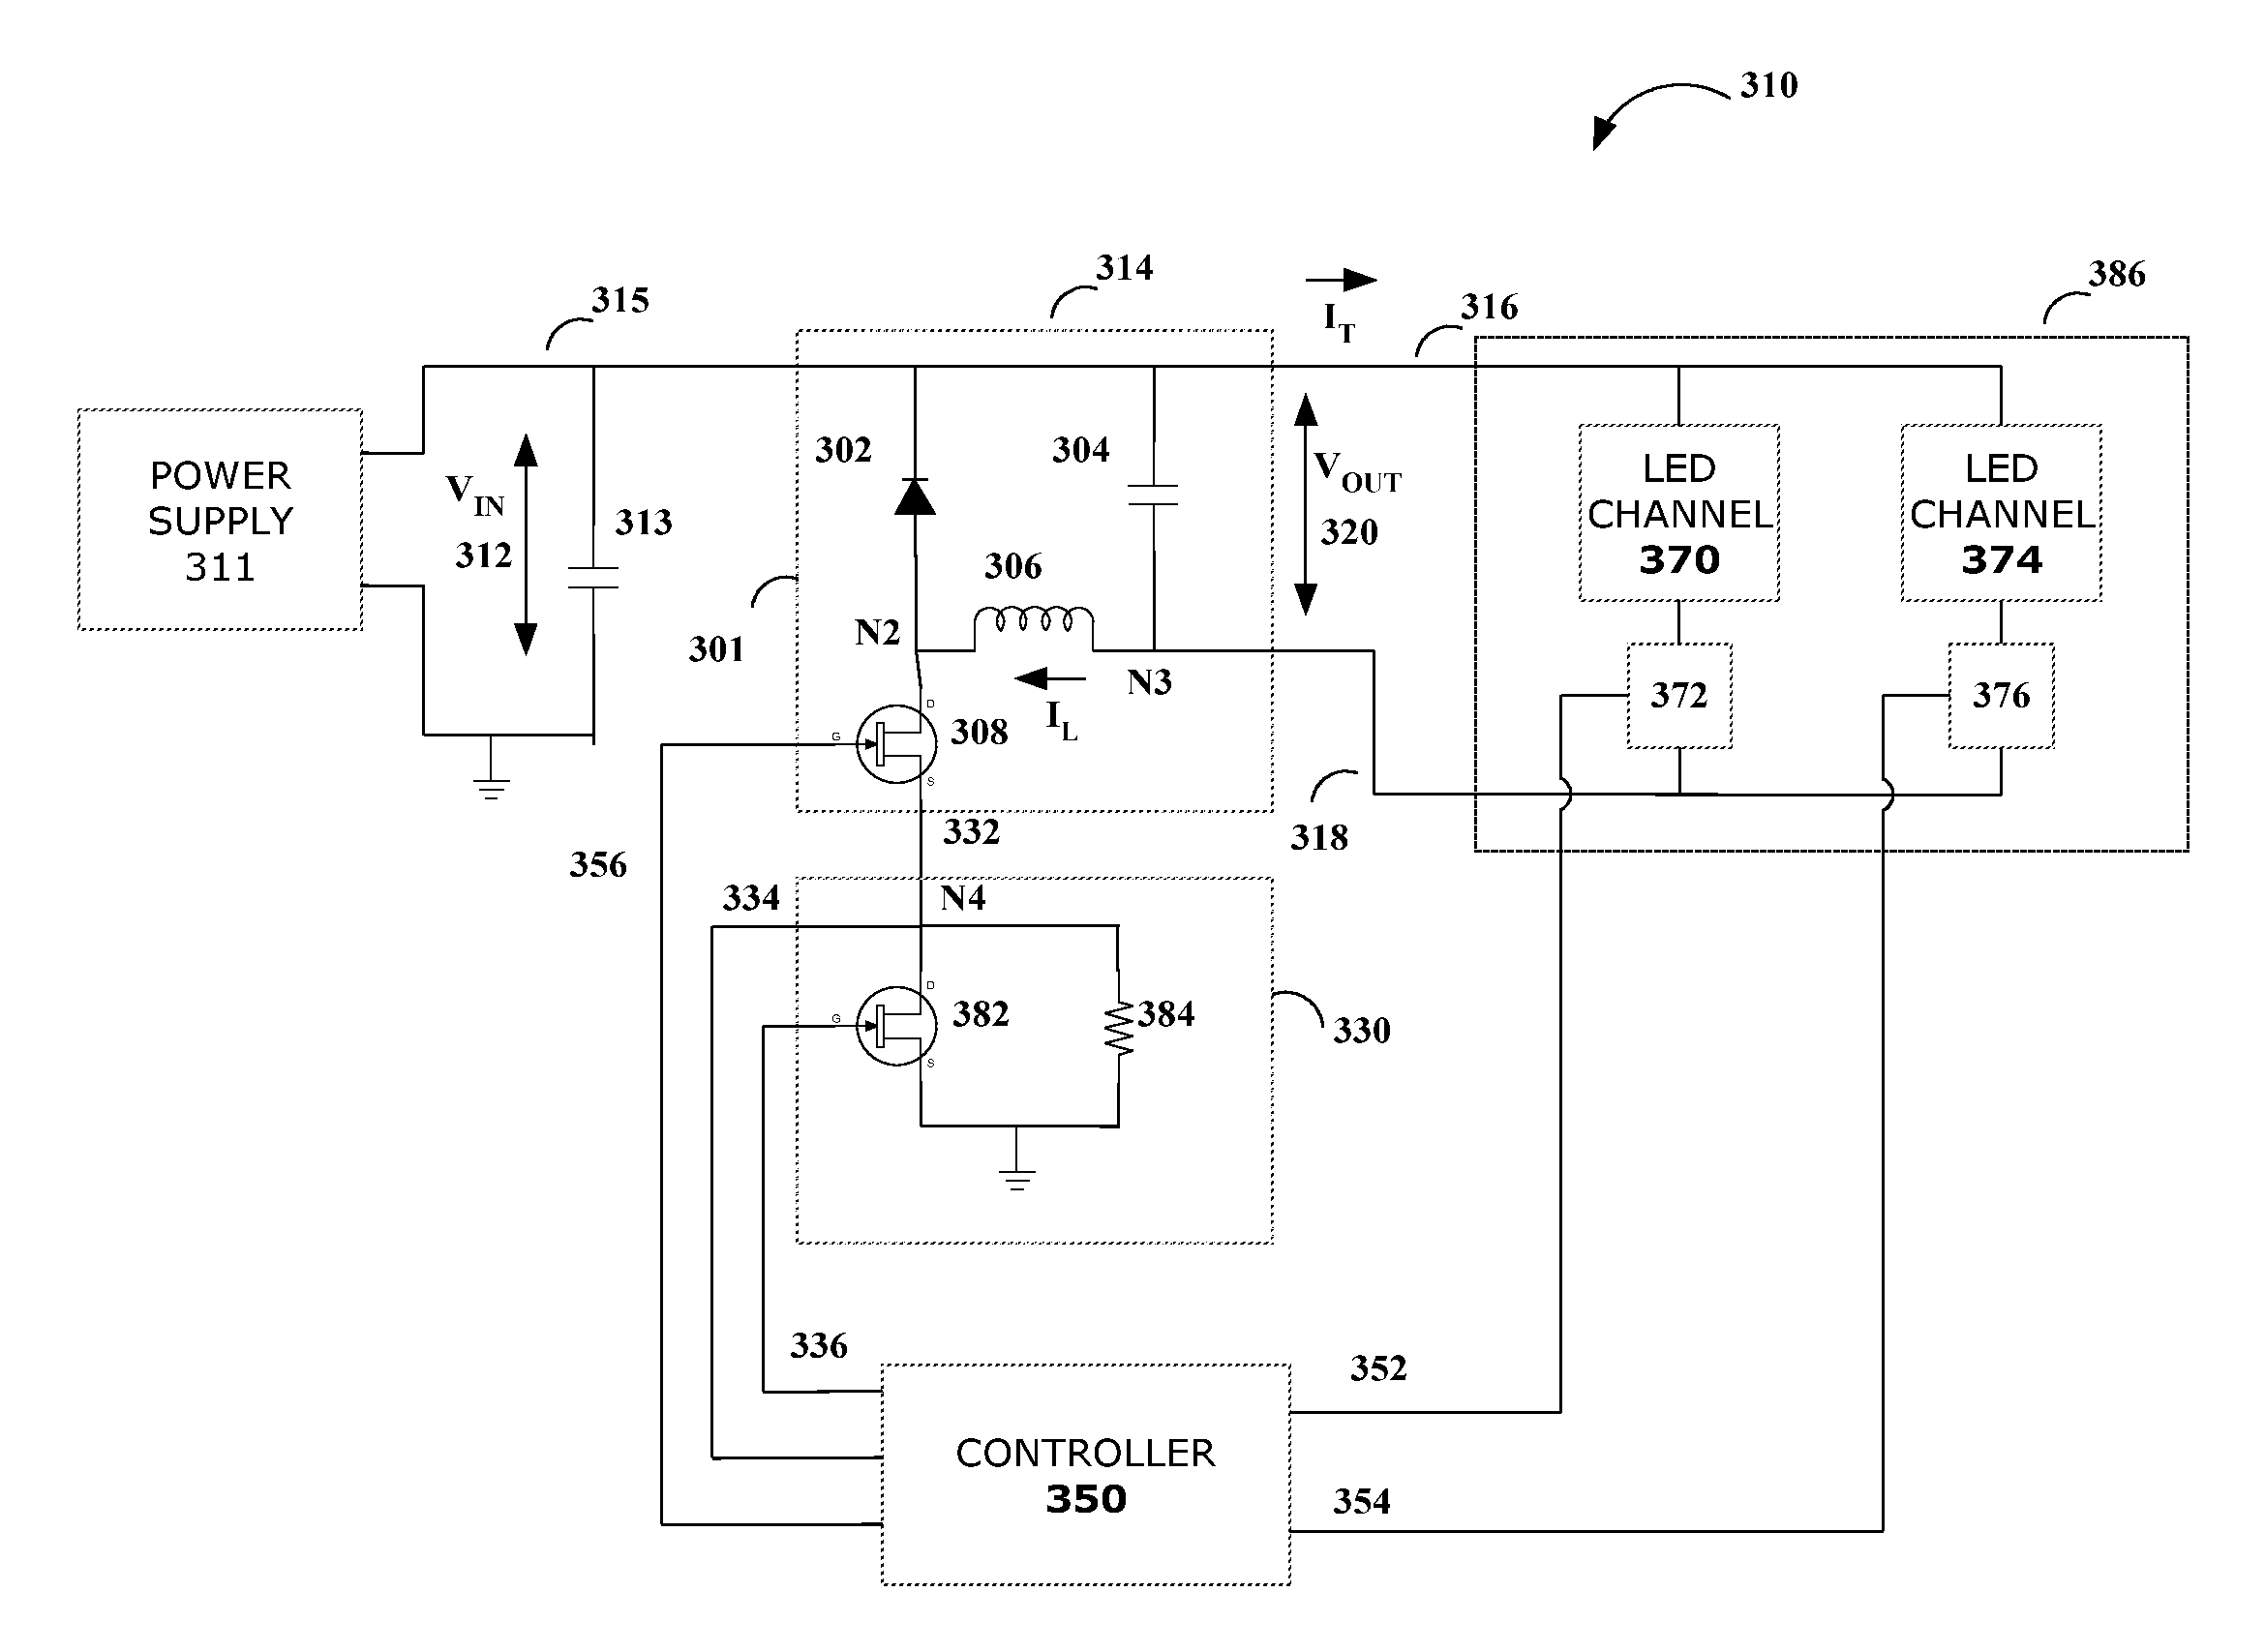 Circuits for sensing current levels within a lighting apparatus incorporating a voltage converter